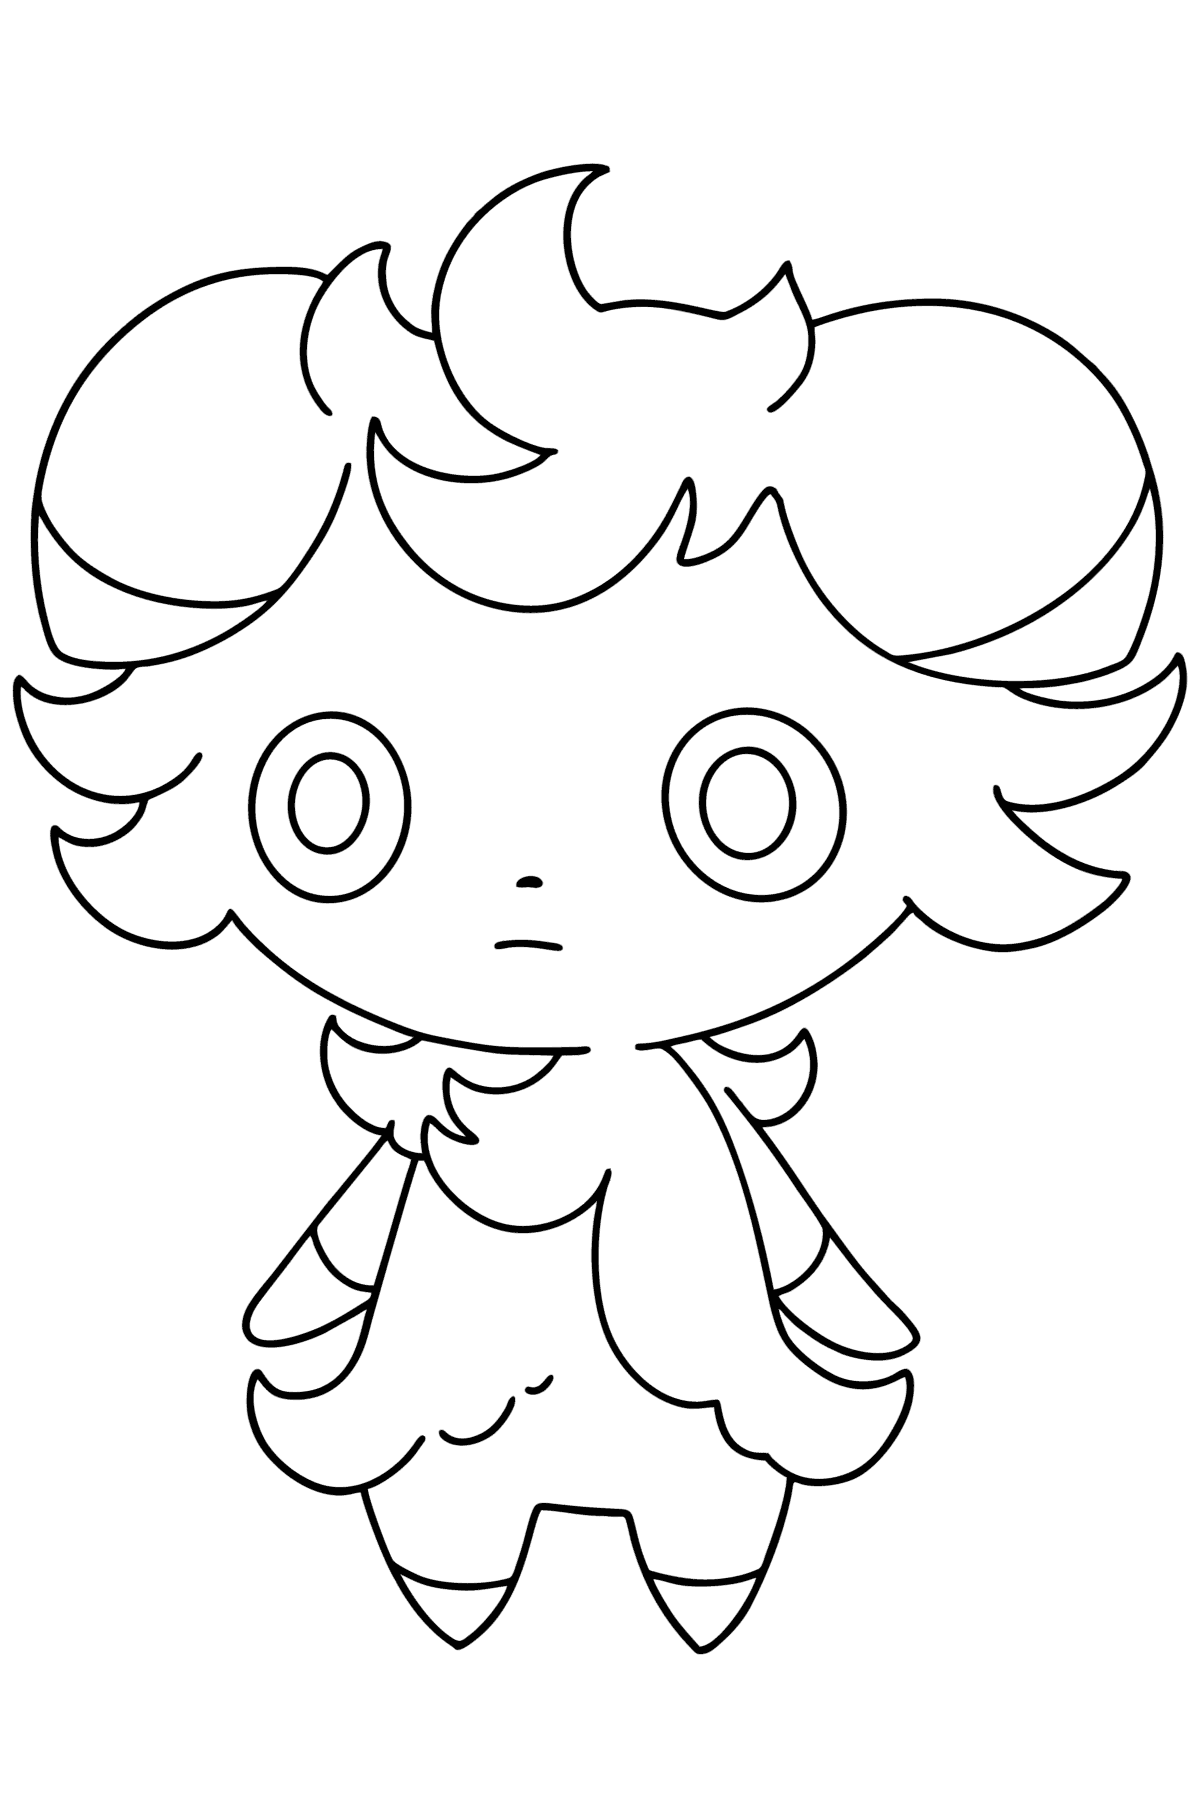 Pokemon Go Espurr coloring page - Coloring Pages for Kids